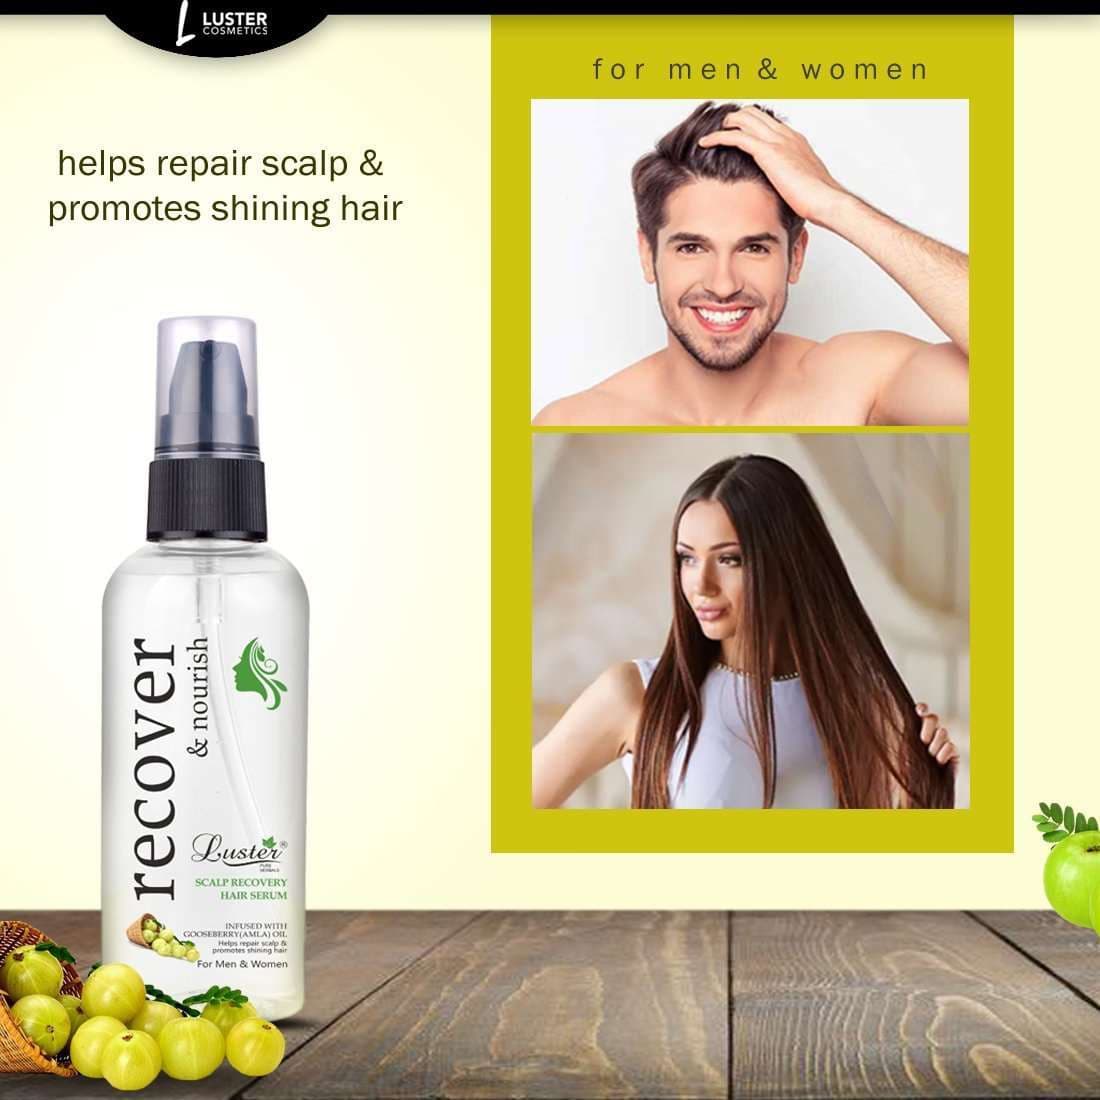 10 Best Hair Serums For Men To Solve Your Hair Problems 2023